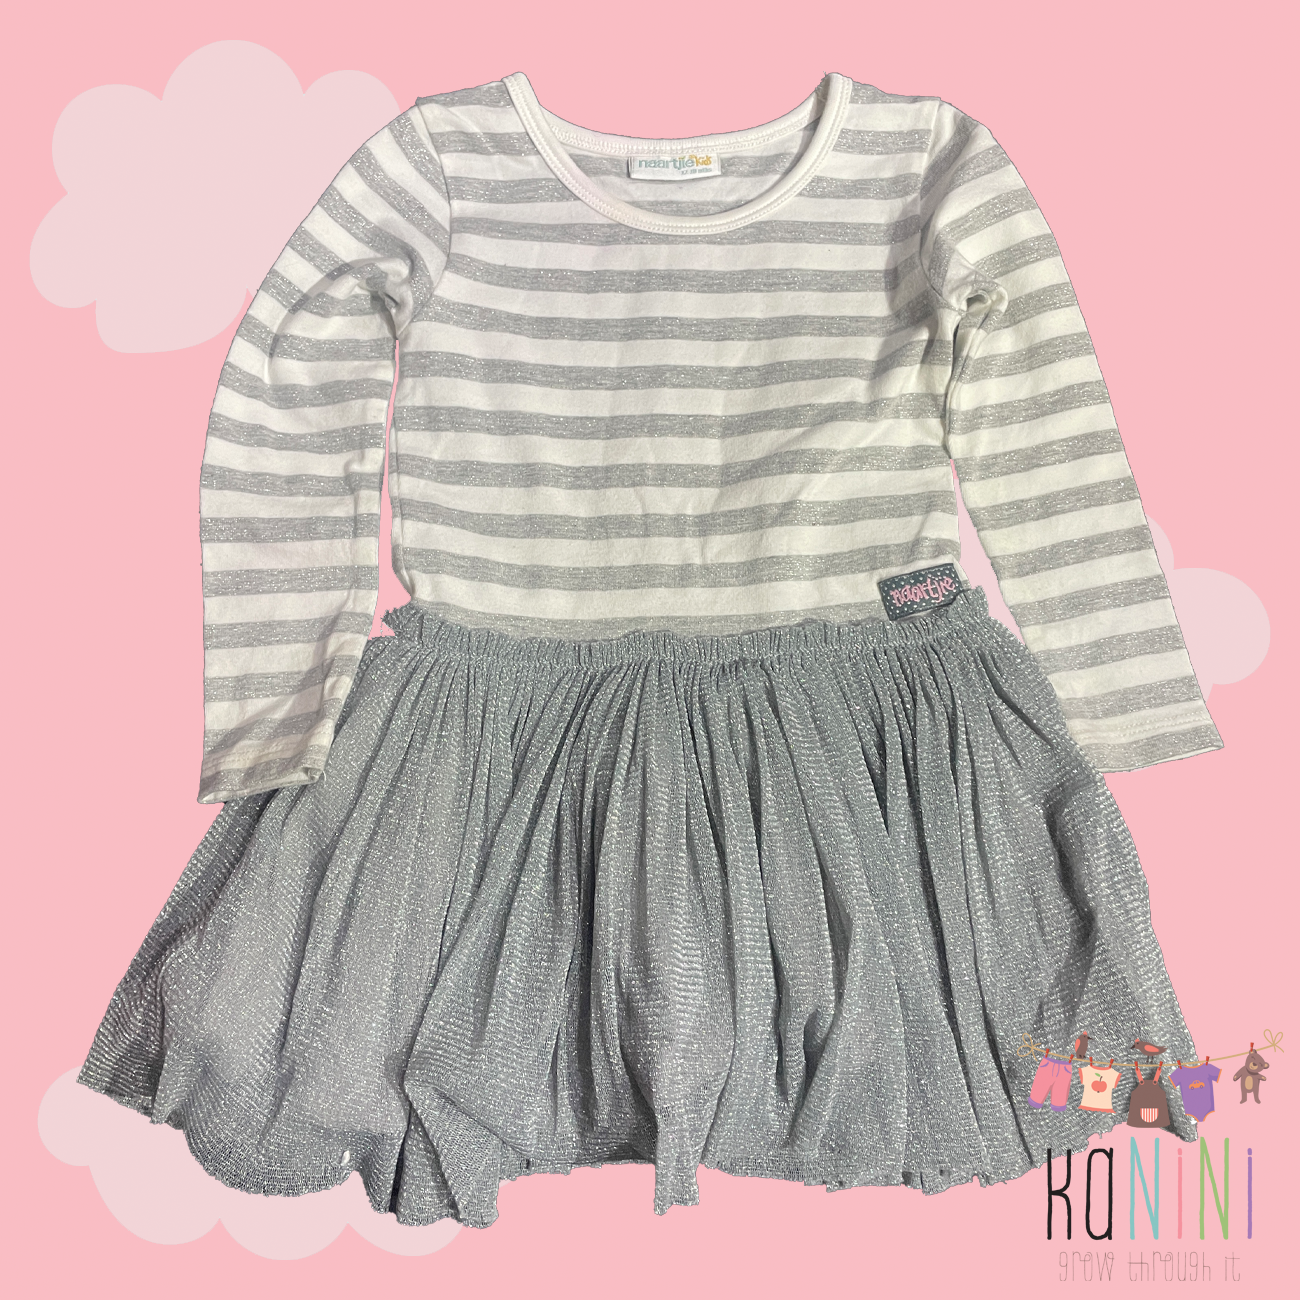 Featured image for “Naartjie 12 - 18 Months Girls Silver Twirl Dress”